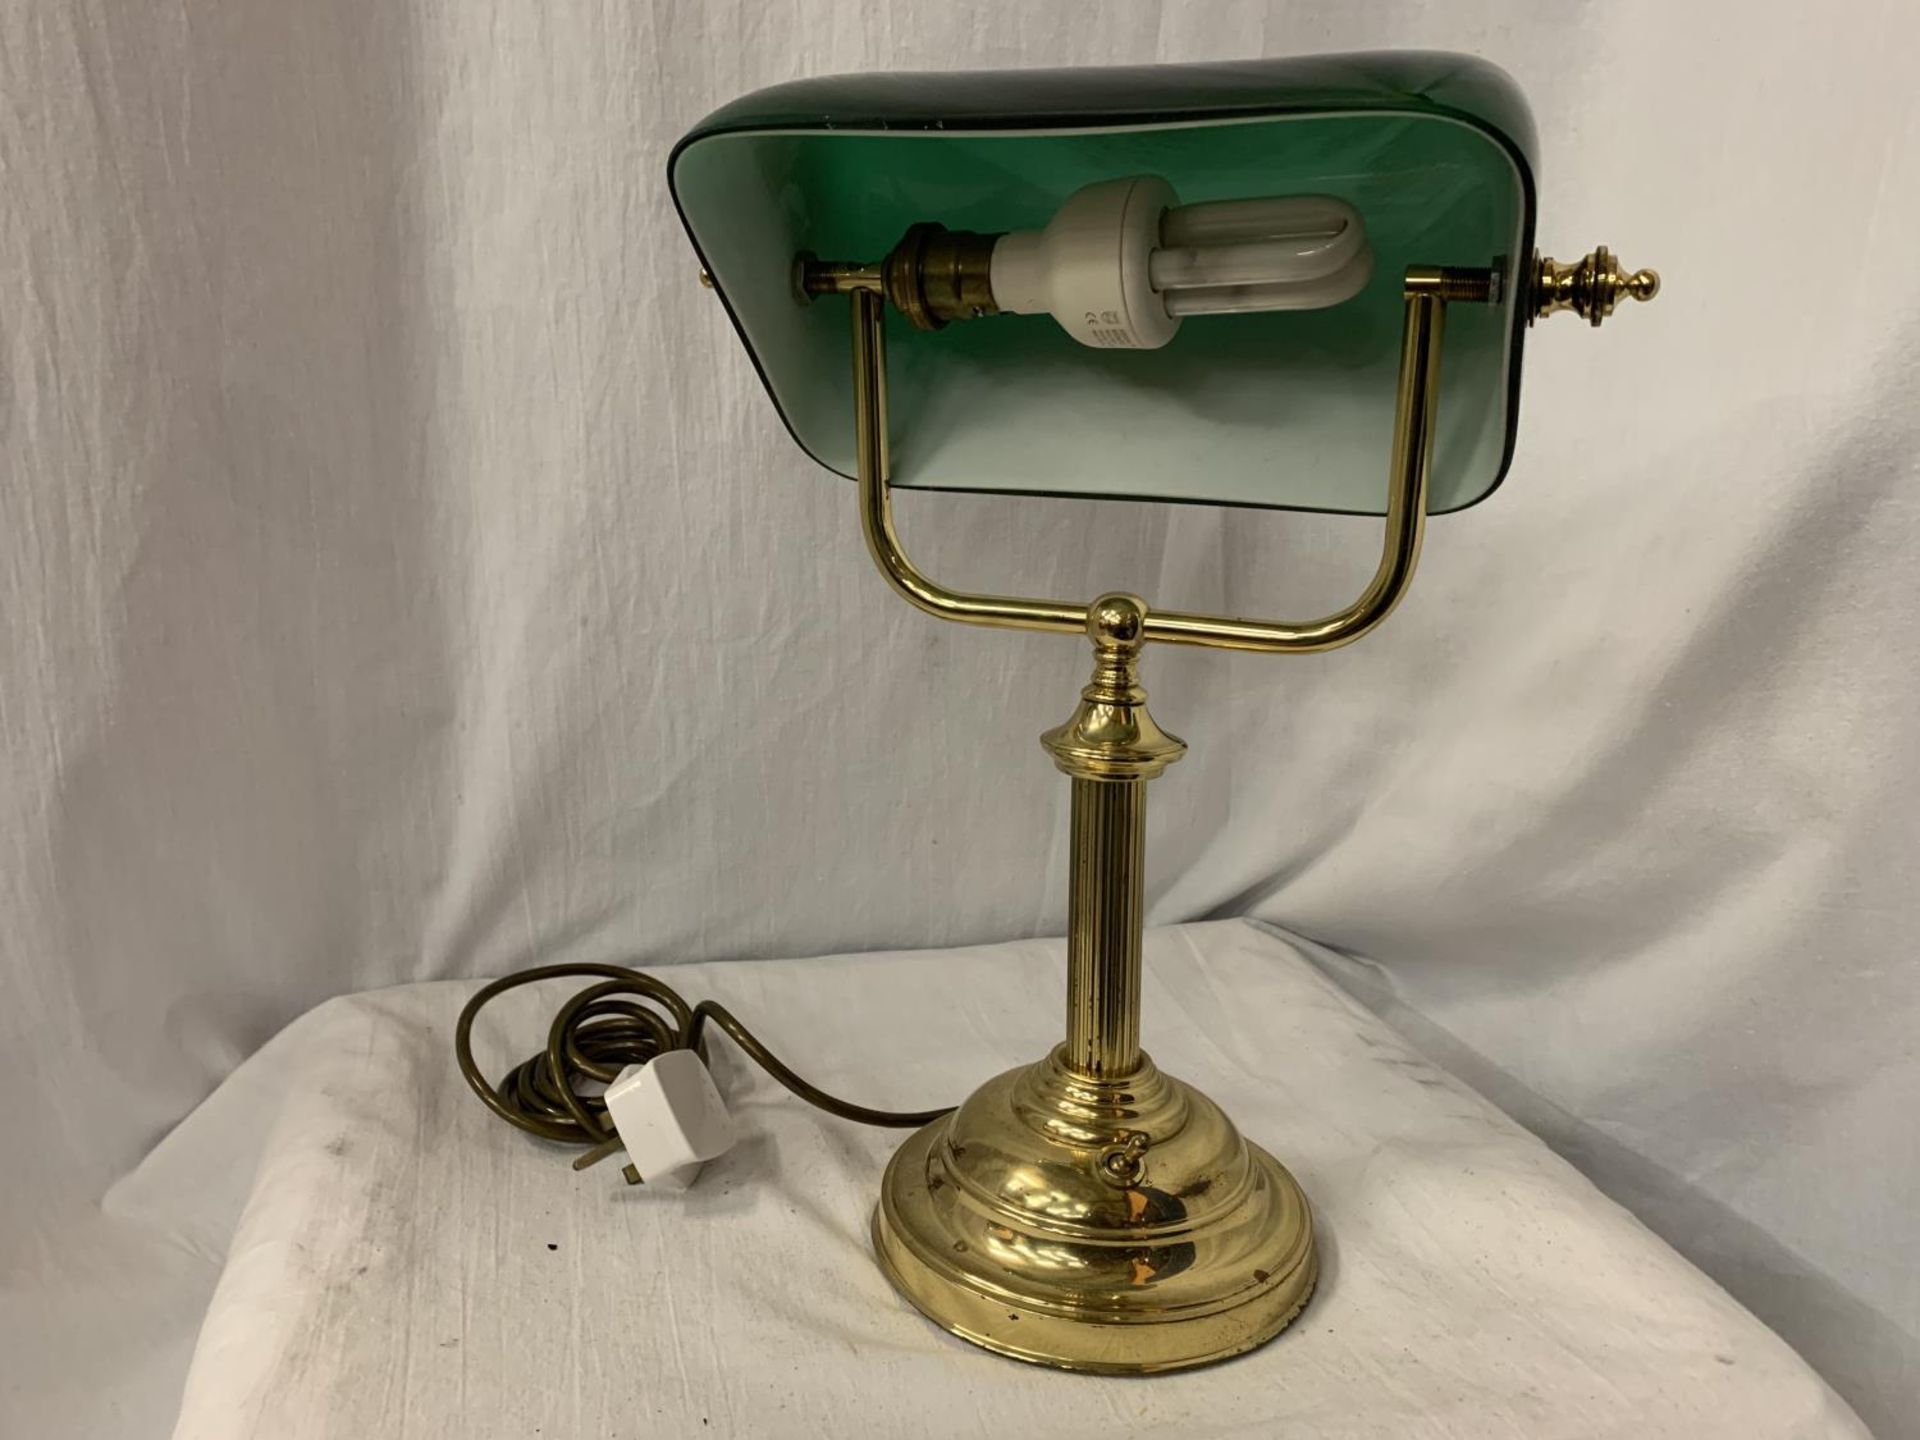 A BRASS BANKER'S DESK LAMP WITH GREEN GLASS SHADE - Image 3 of 4